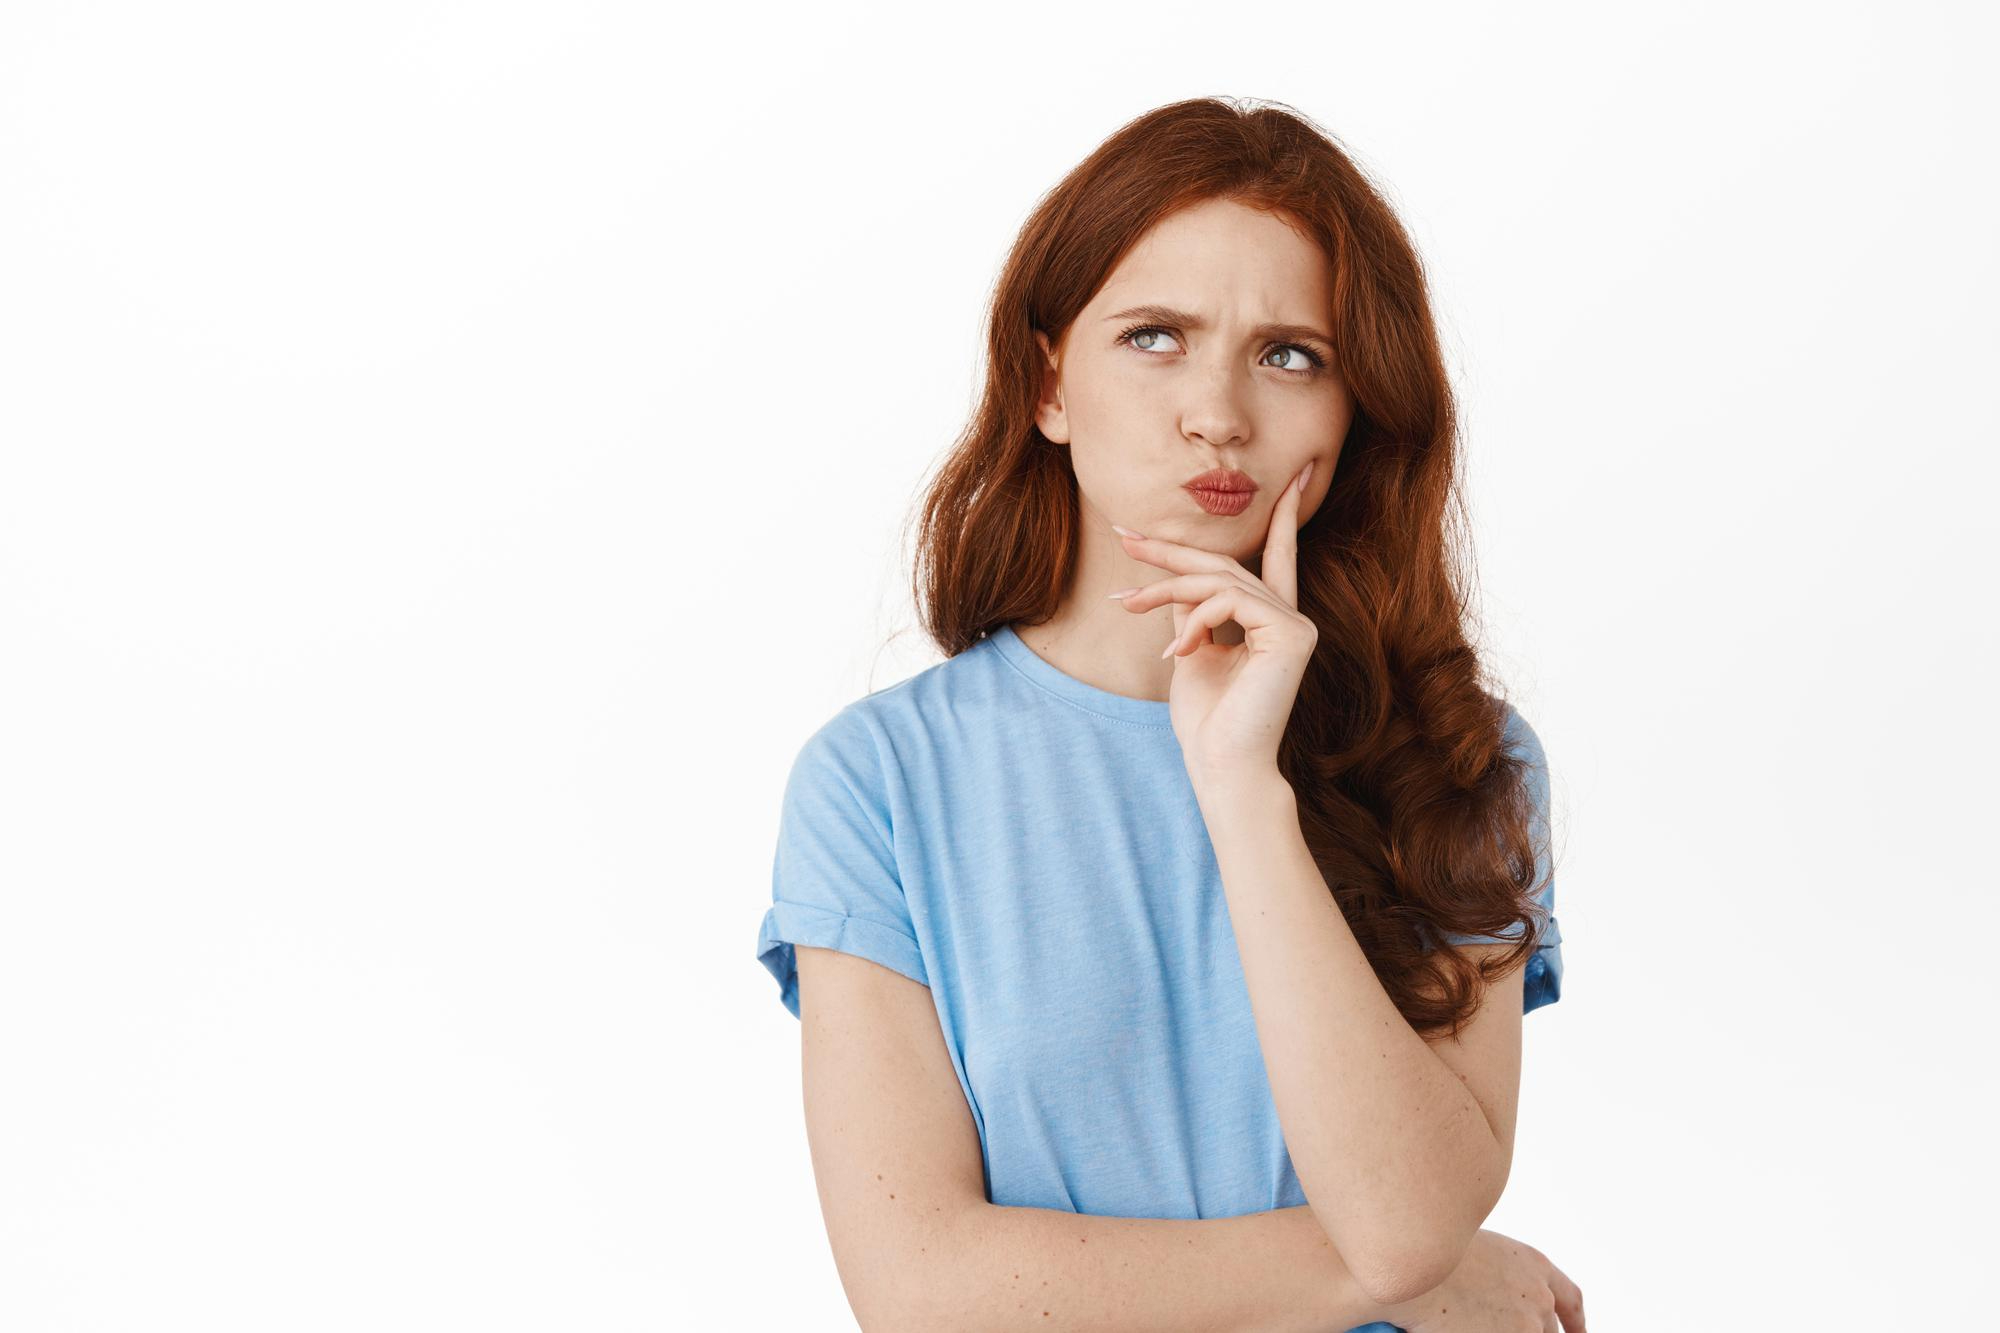 image-thoughtful-hesitant-girl-with-red-hair-making-decision-frowning-perplexed-thinking-touching-lip-pondering-standing-against-white-background